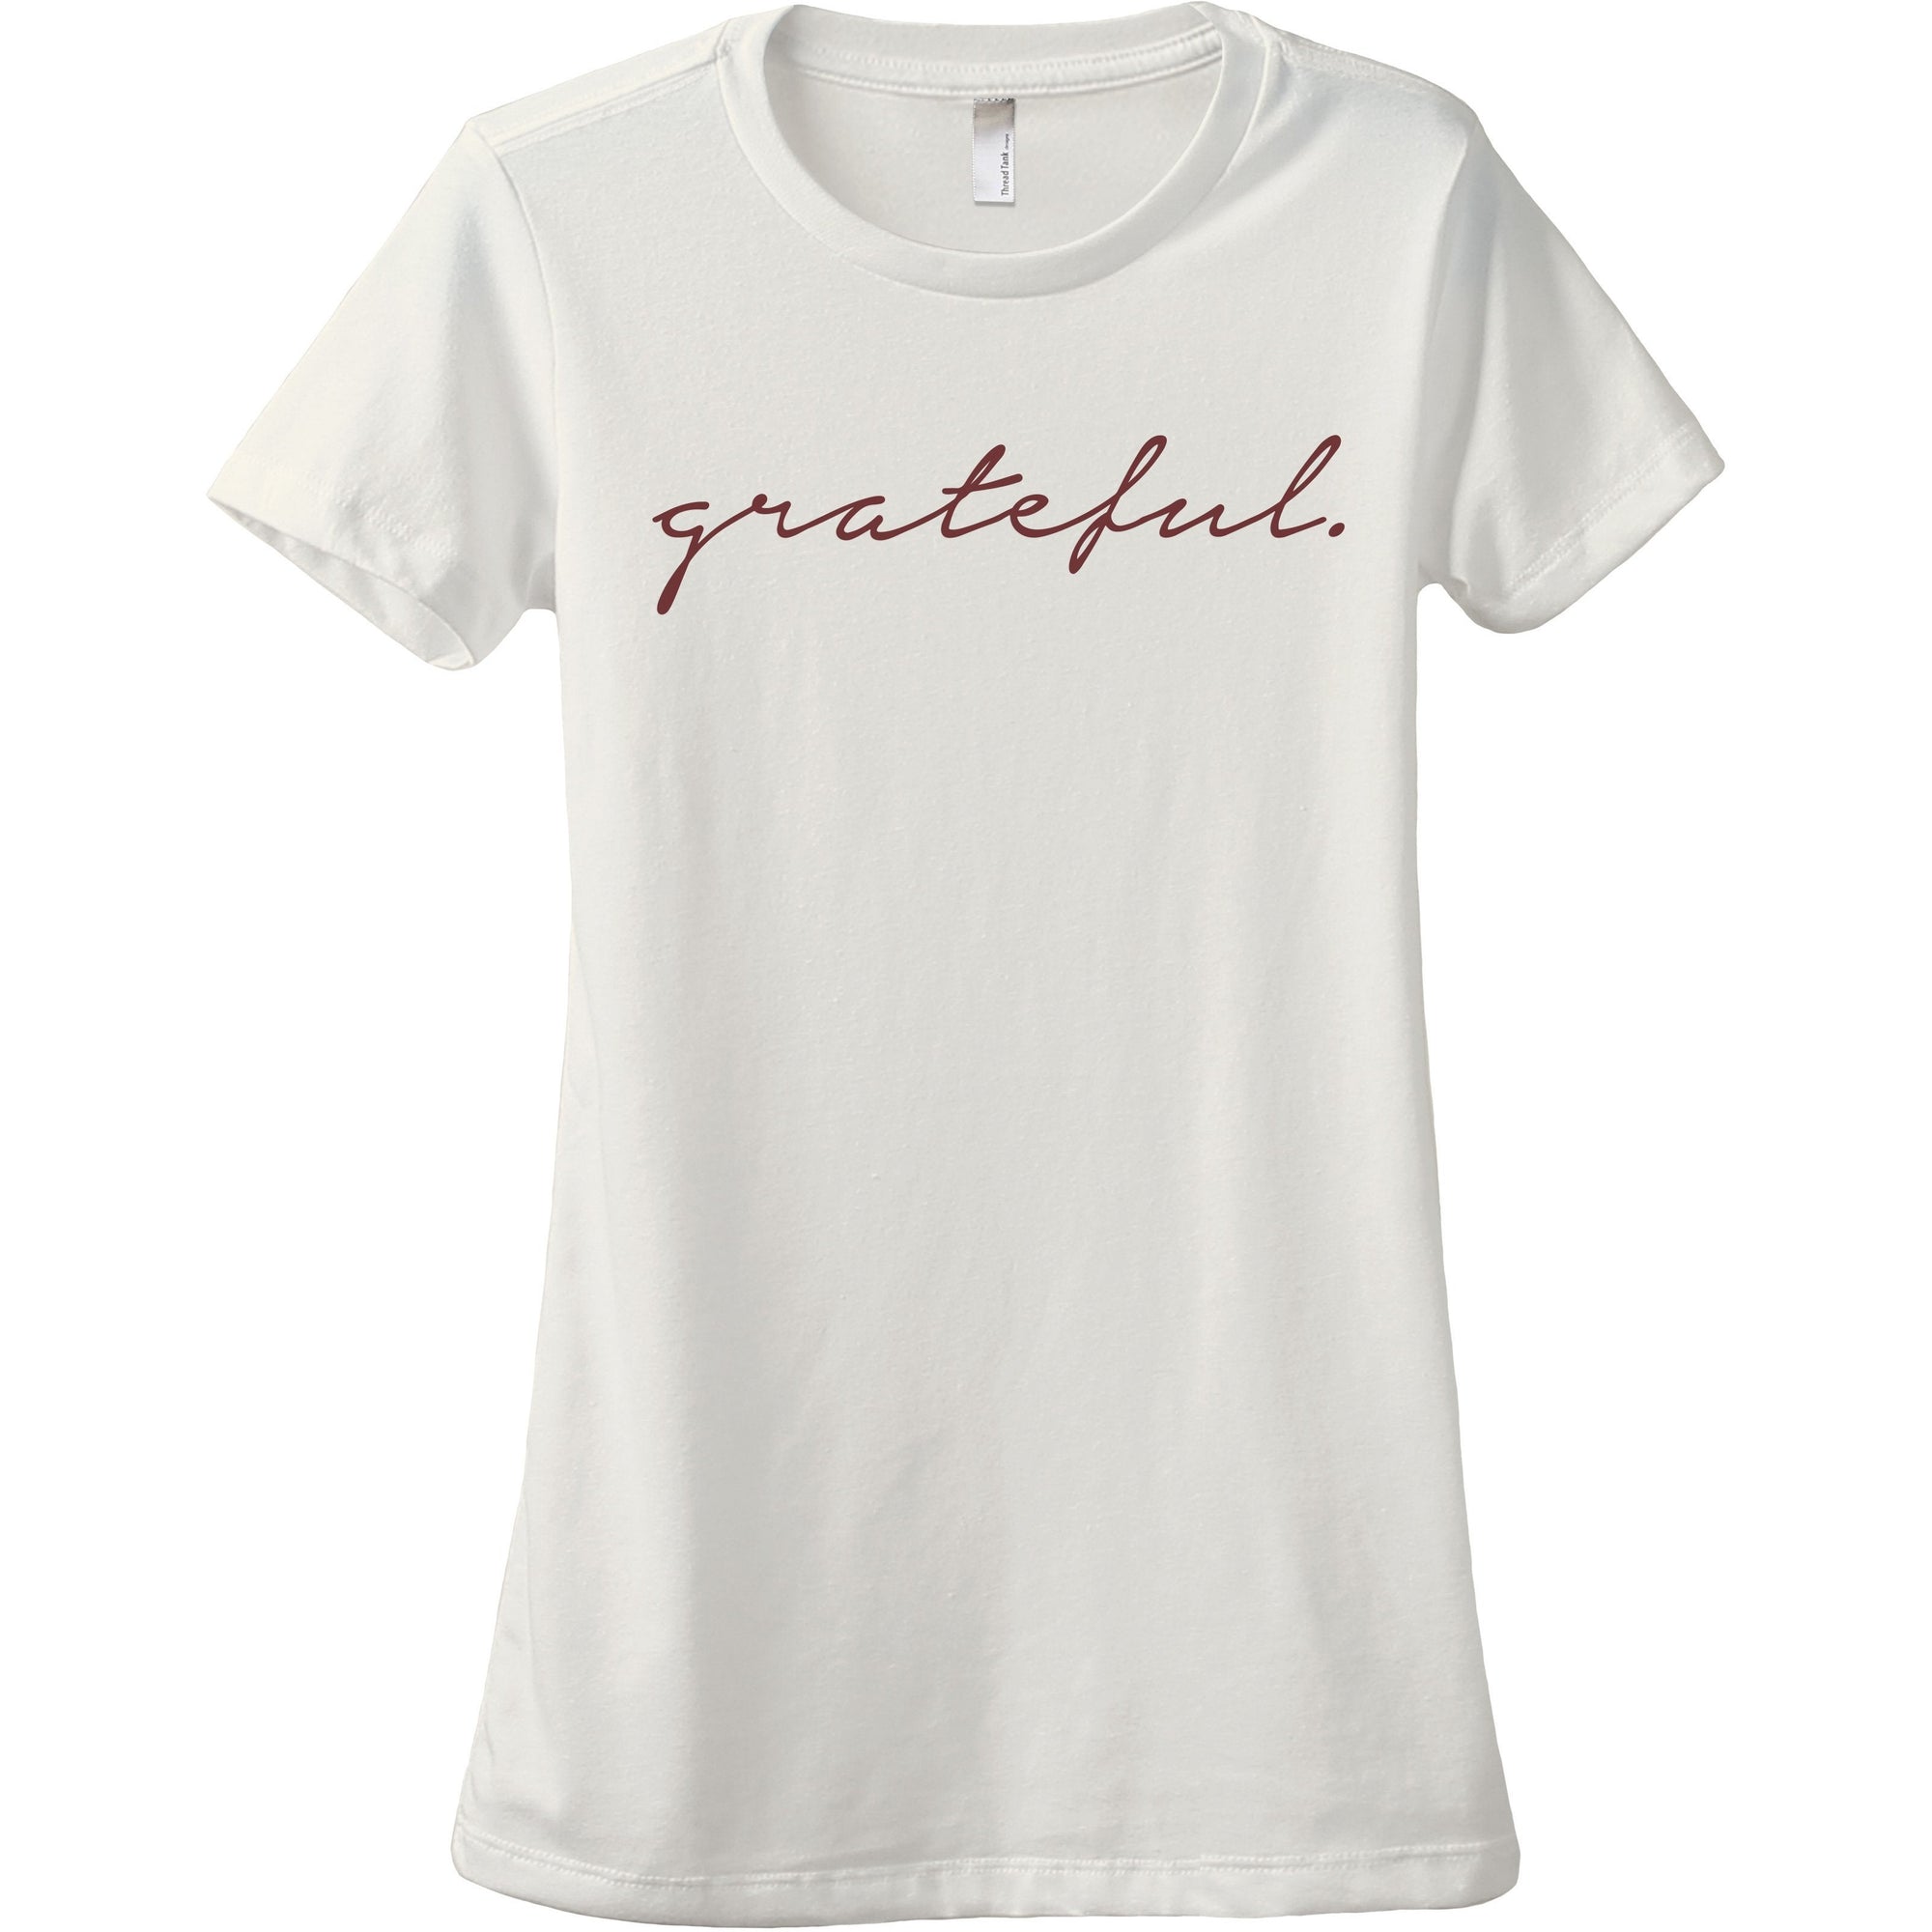 Grateful Women's Relaxed Crewneck T-Shirt Top Tee Vintage White